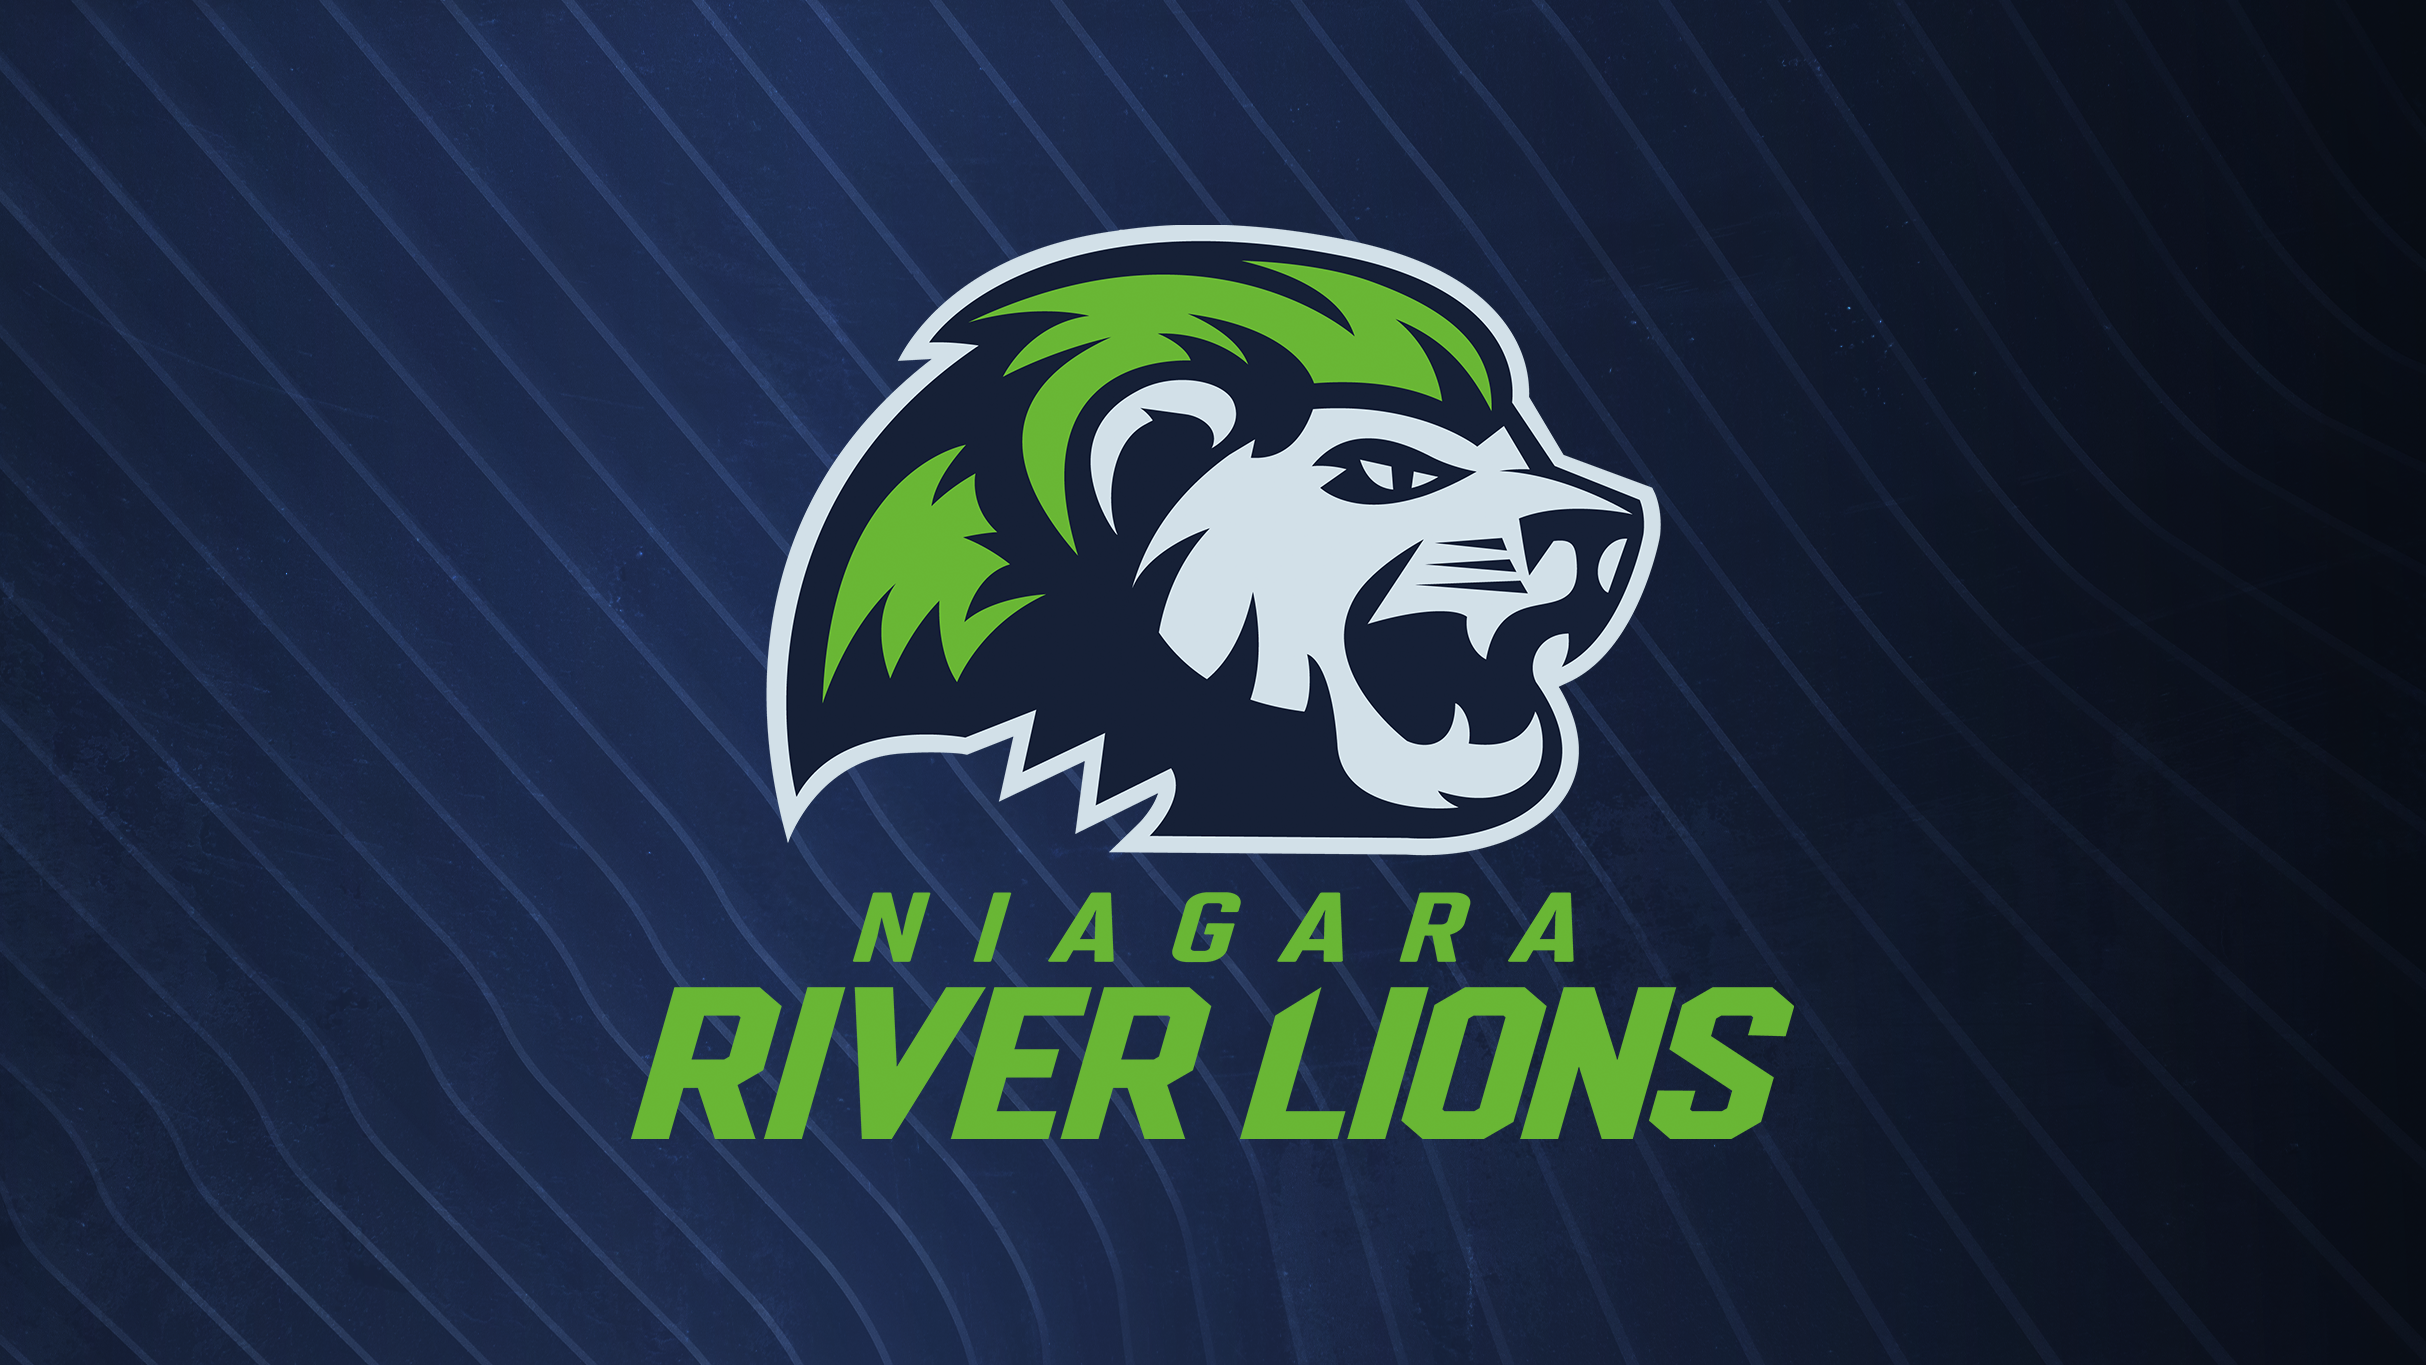 Niagara River Lions vs. Brampton Honey Badgers in St Catharines promo photo for Canada Basketball presale offer code